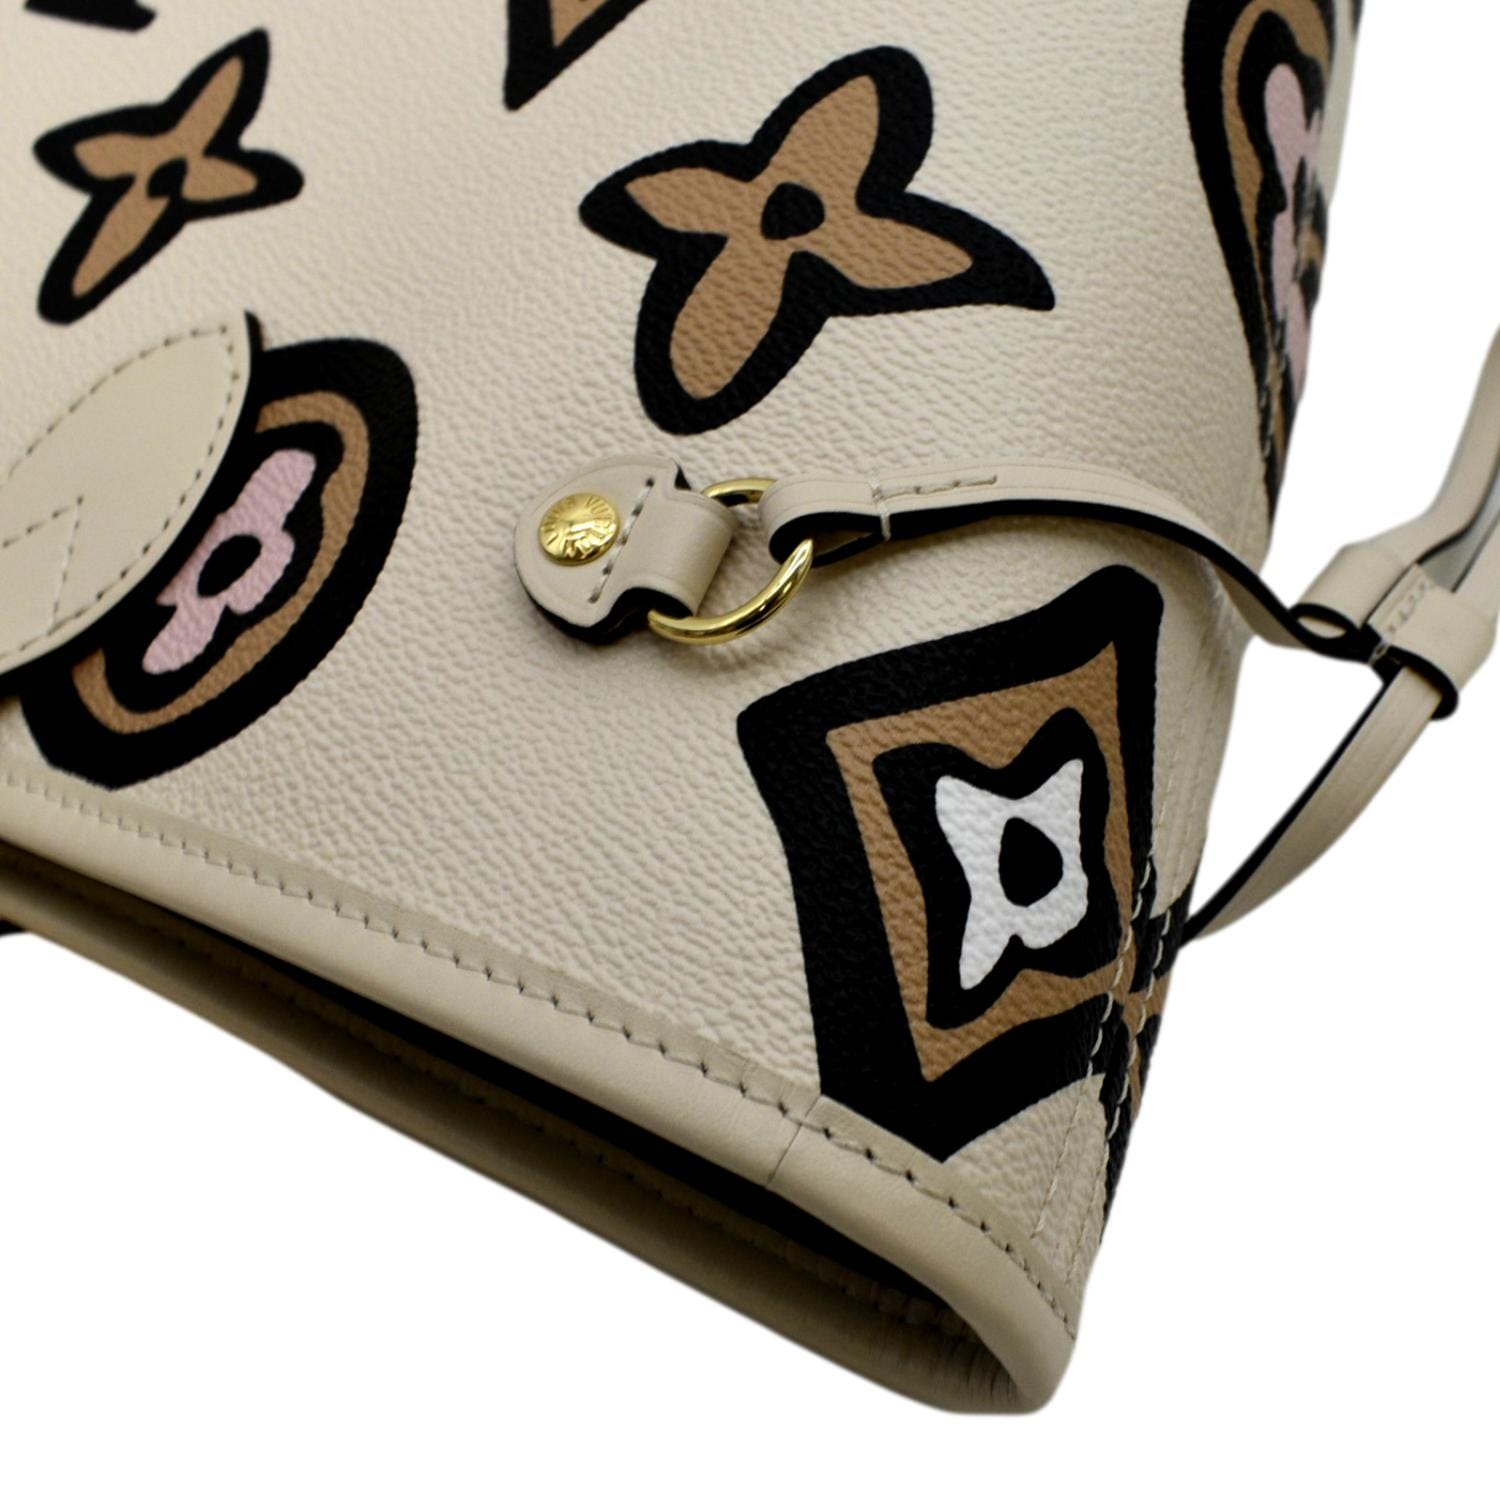 LOUIS VUITTON WILD AT HEART NEVERFULL MM CREME GIANT MONOGRAM BAG LIMITED  ED.